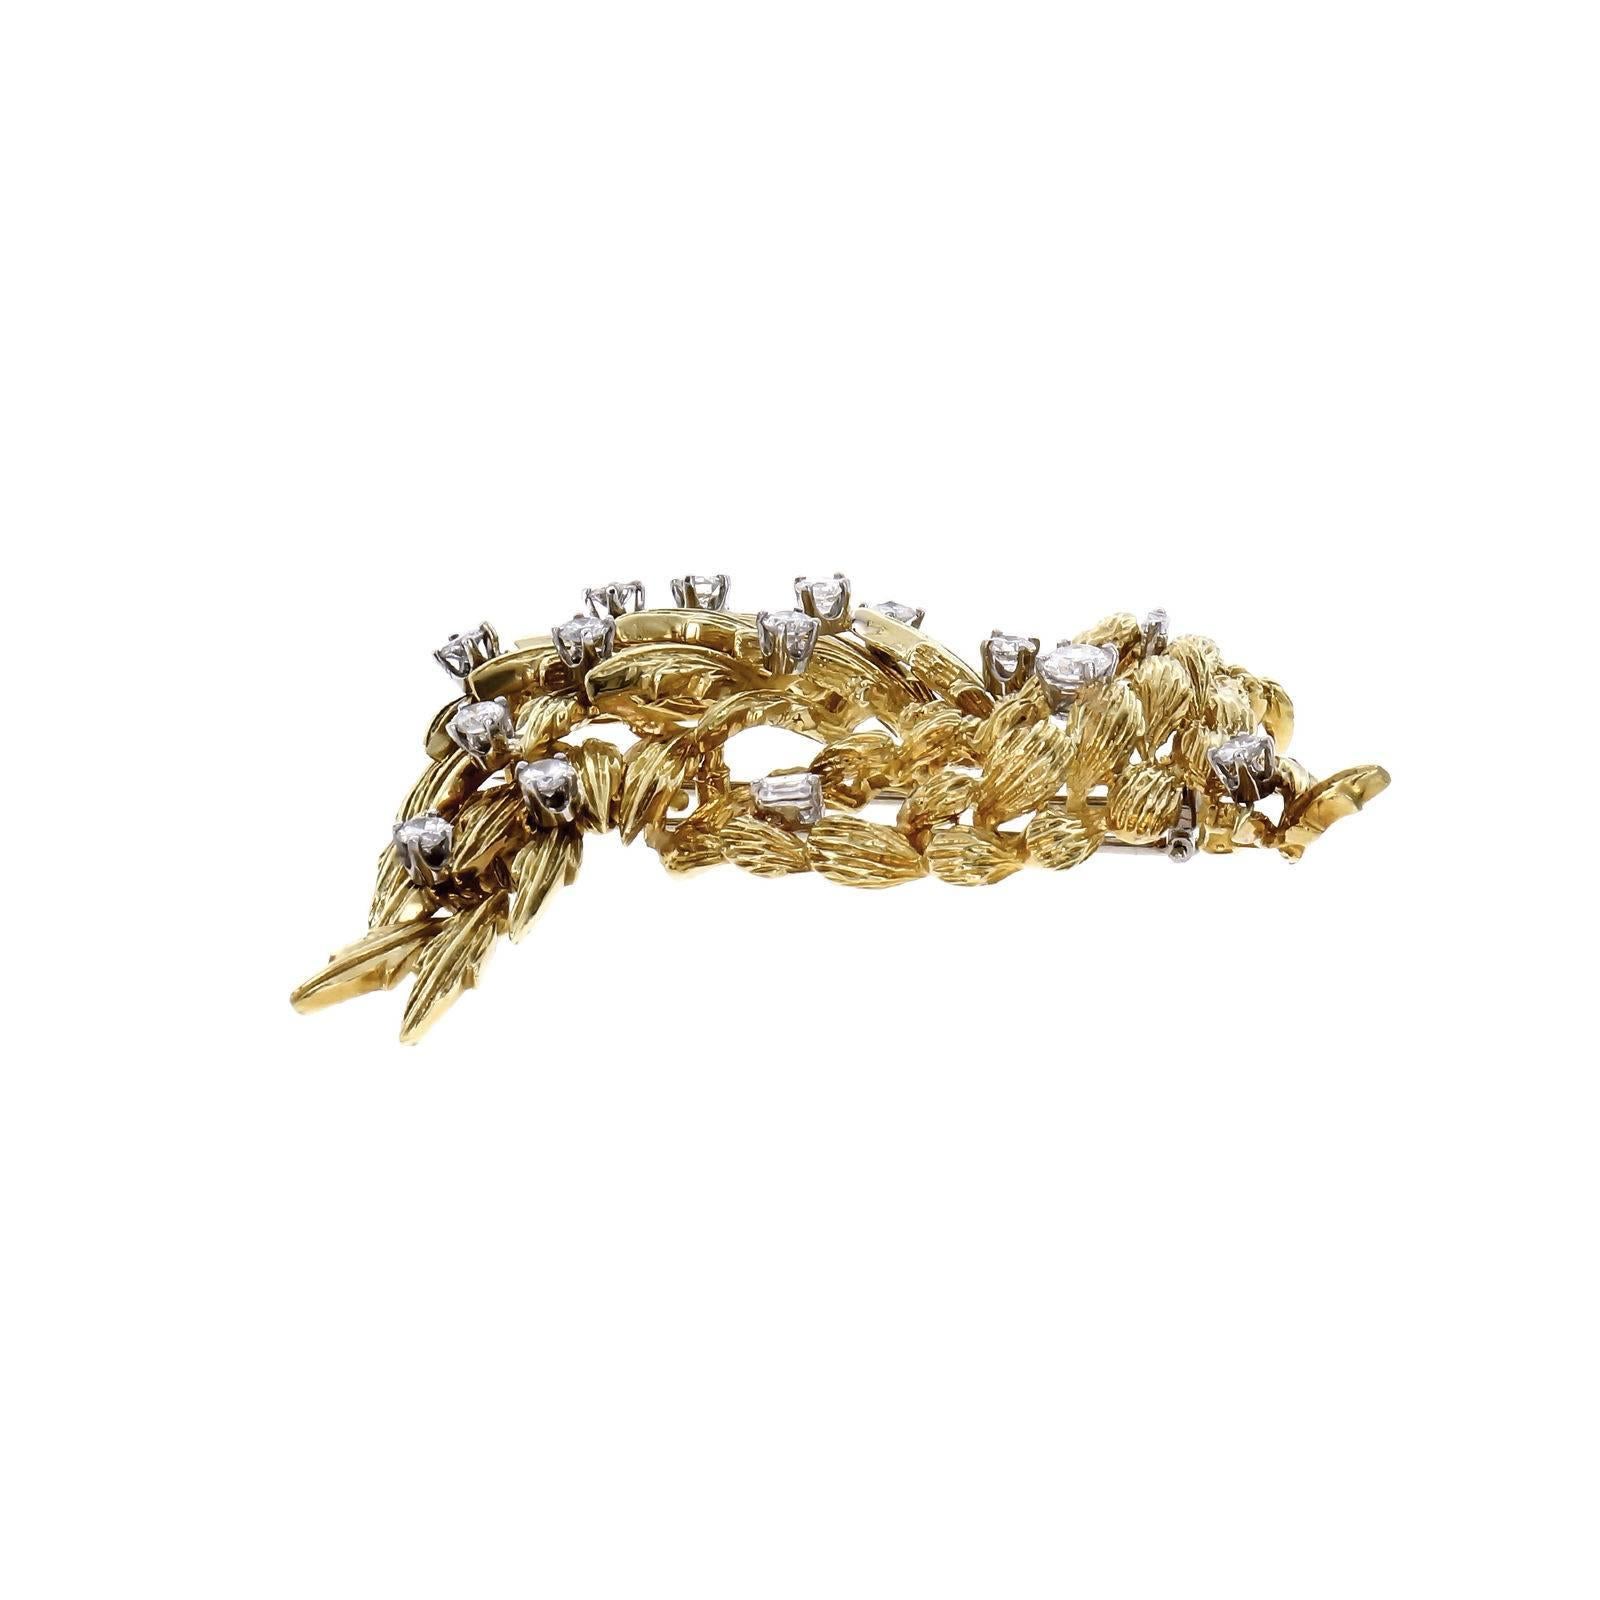 1.30 Carat Diamond Textured Gold Brooch In Good Condition For Sale In Stamford, CT